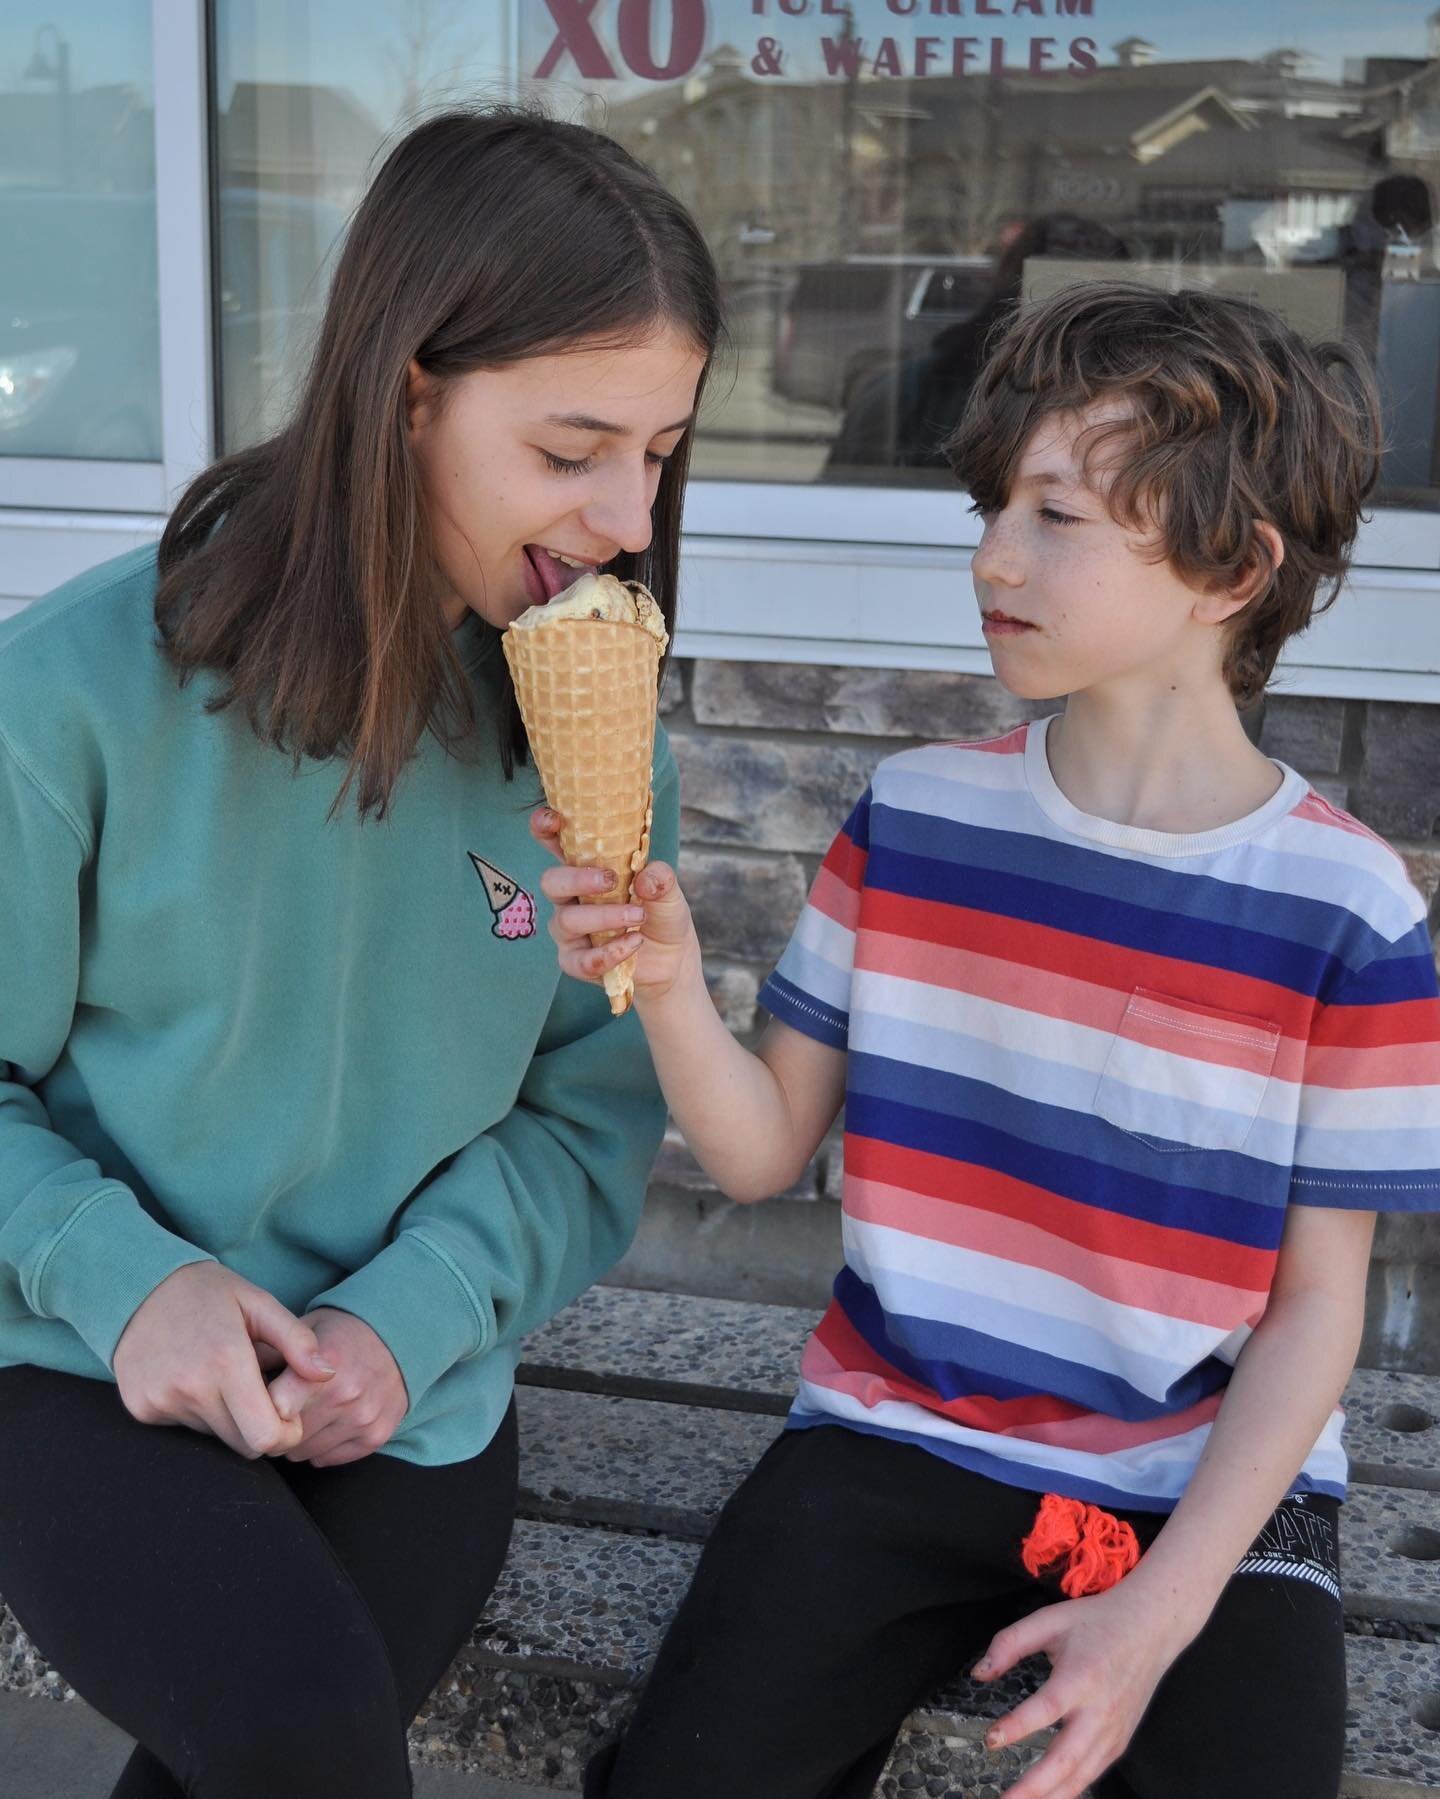 When your sister asks if she can try your scoop of CR&Egrave;ME BR&Ucirc;L&Eacute;E 😐
.
.
.
#xoicecream #madewithlove #yycmom #yyccommunity #yyctakeout #auburnbaycalgary #cremebruleeicecream